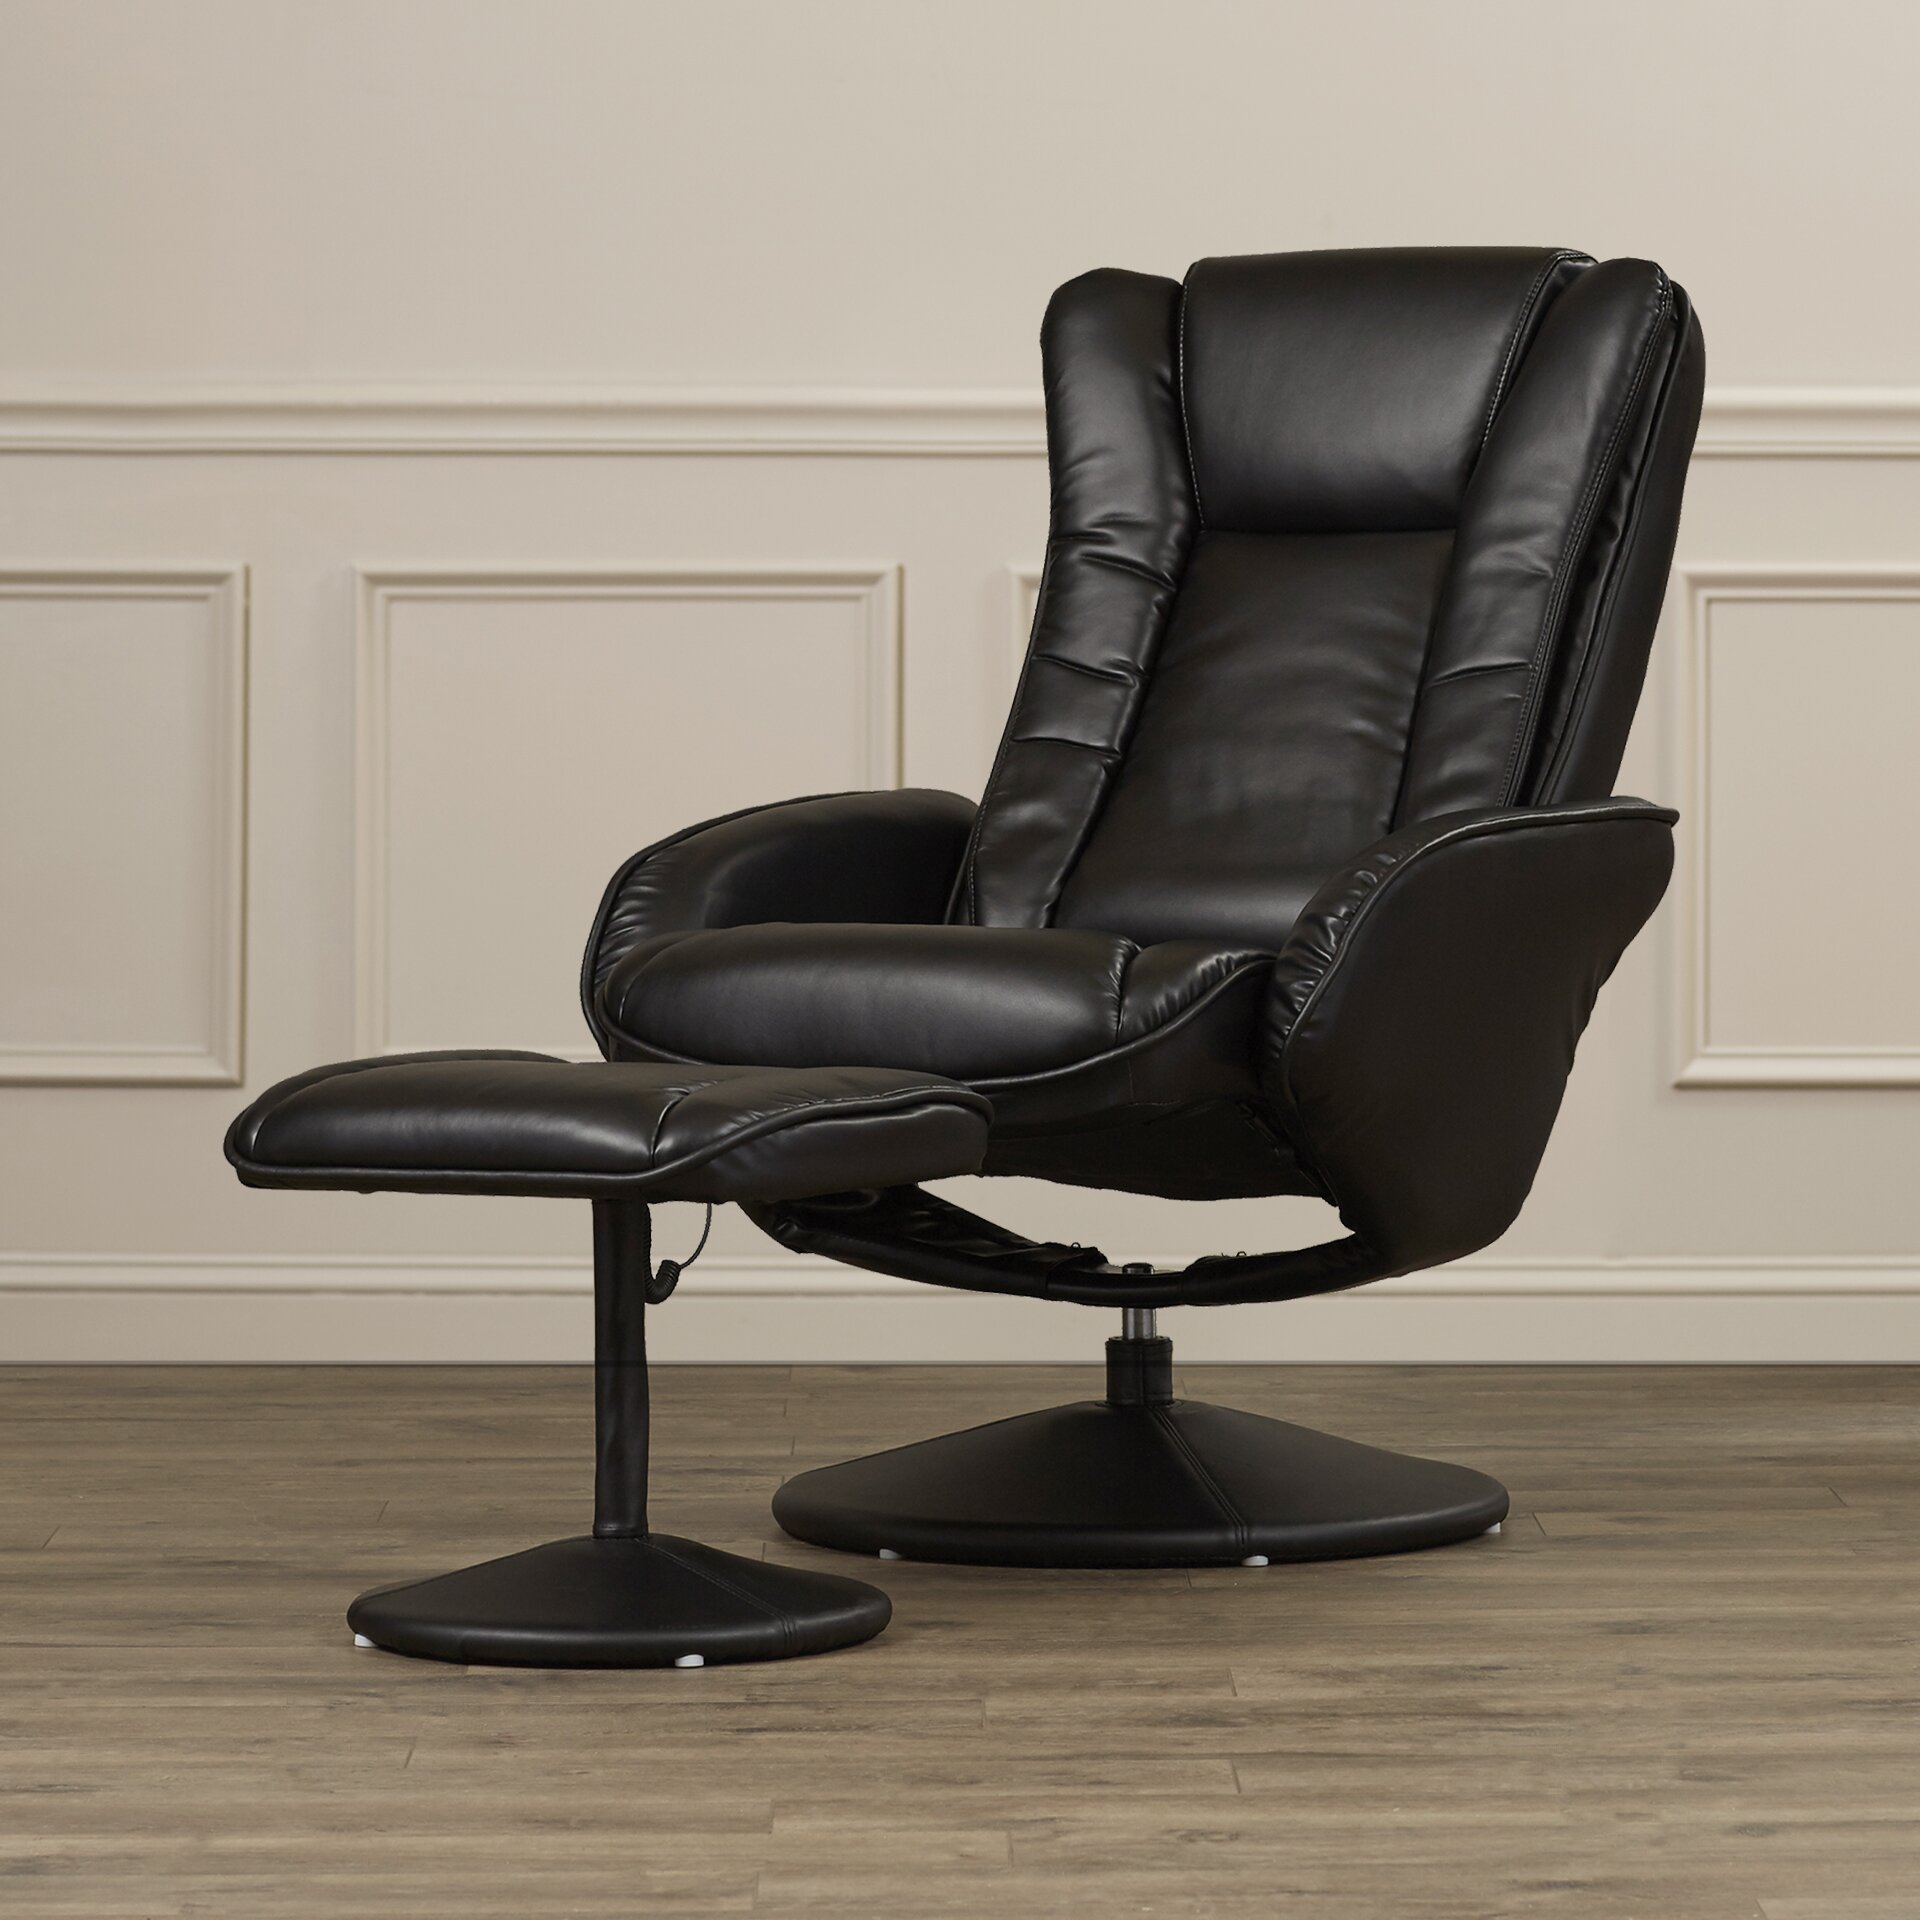 Alcott Hill Leather Heated Reclining Massage Chair ...